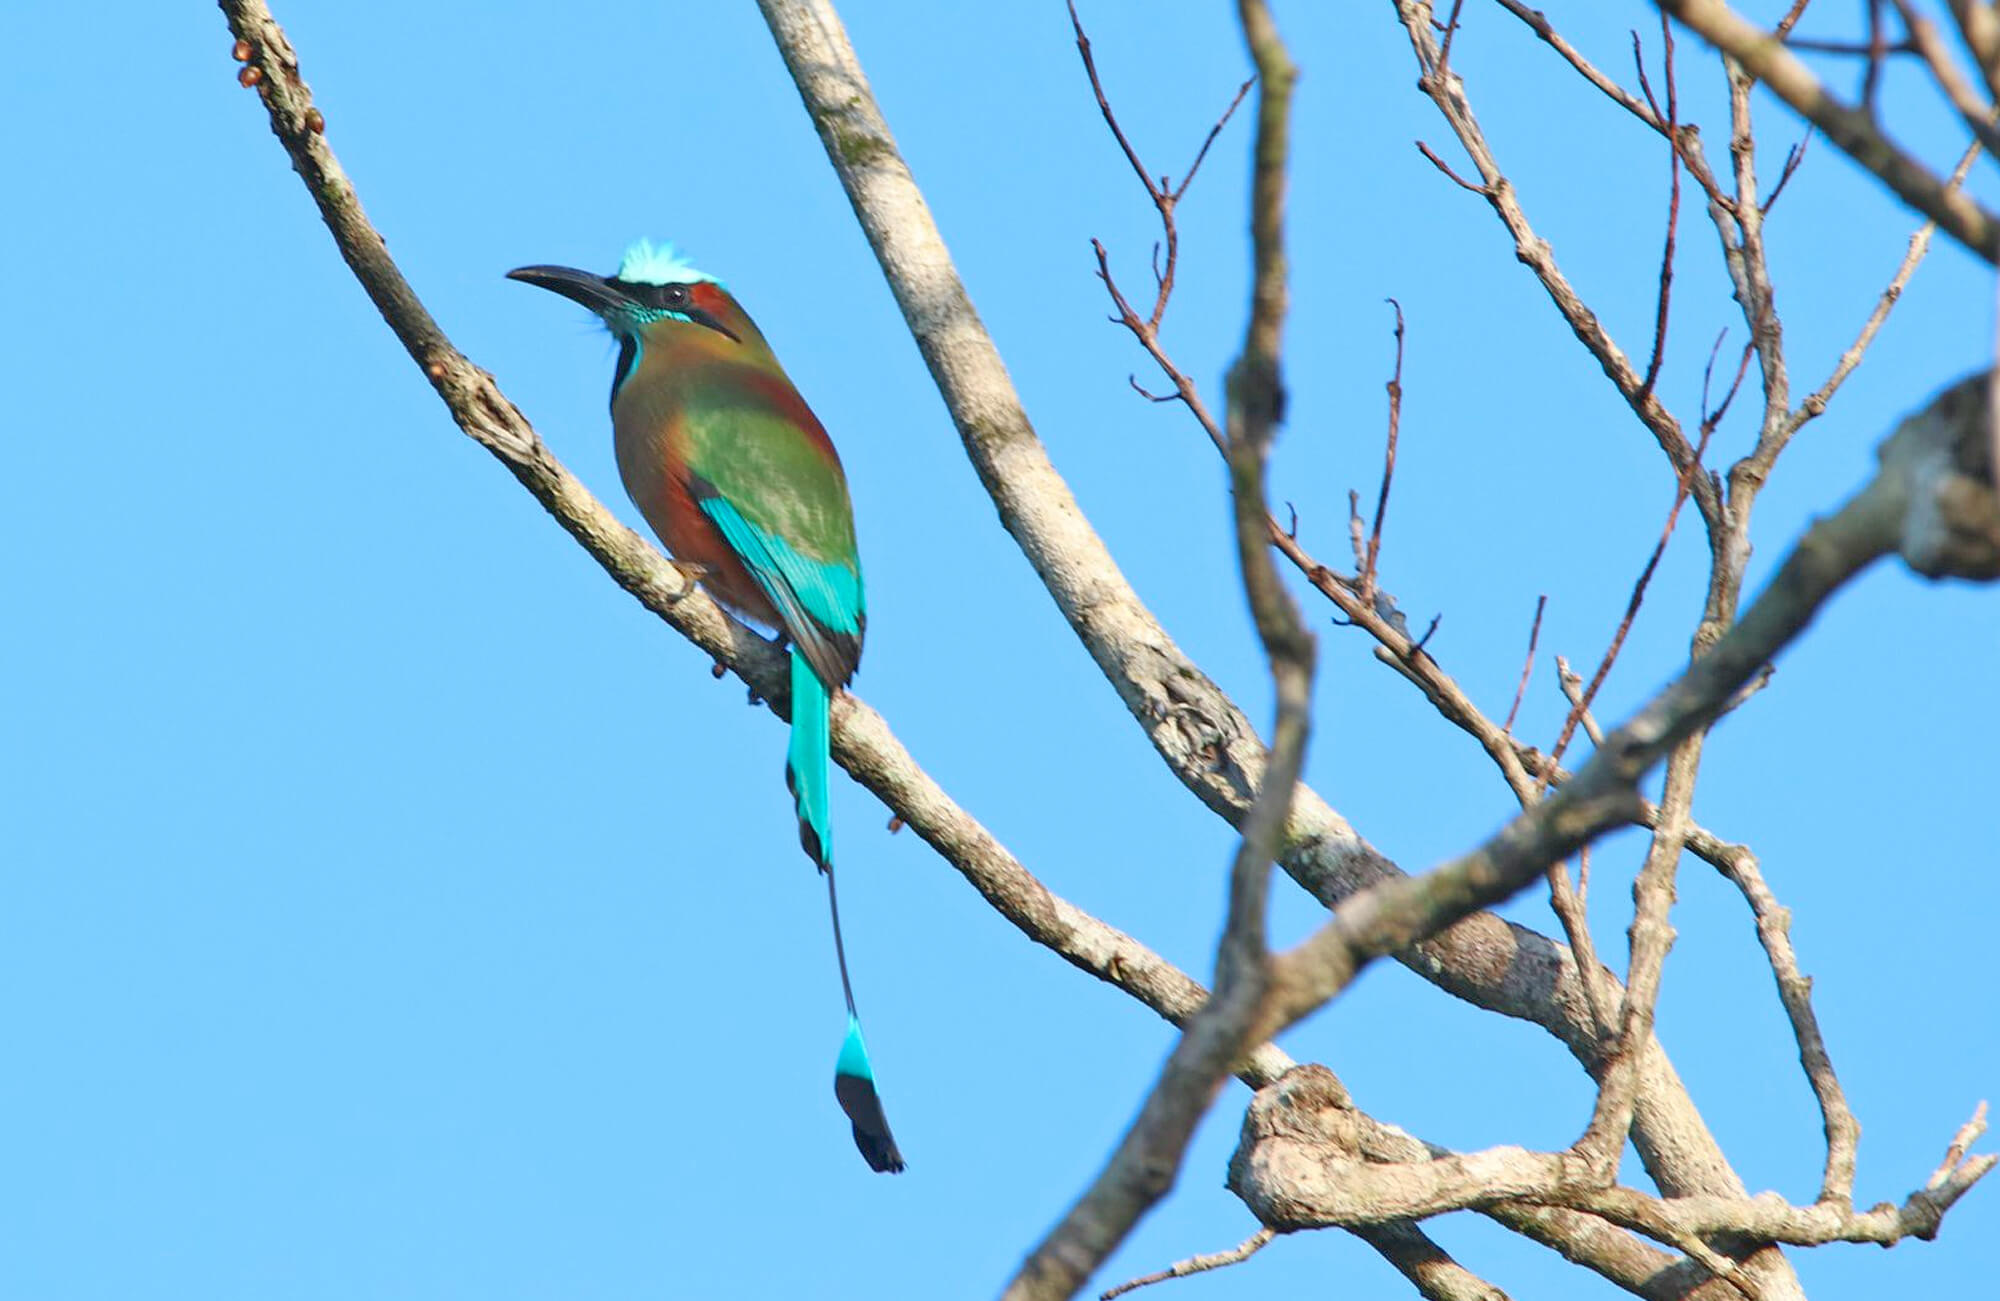 Turquoise-browed Motmot | Yucatán and Cozumel Tour